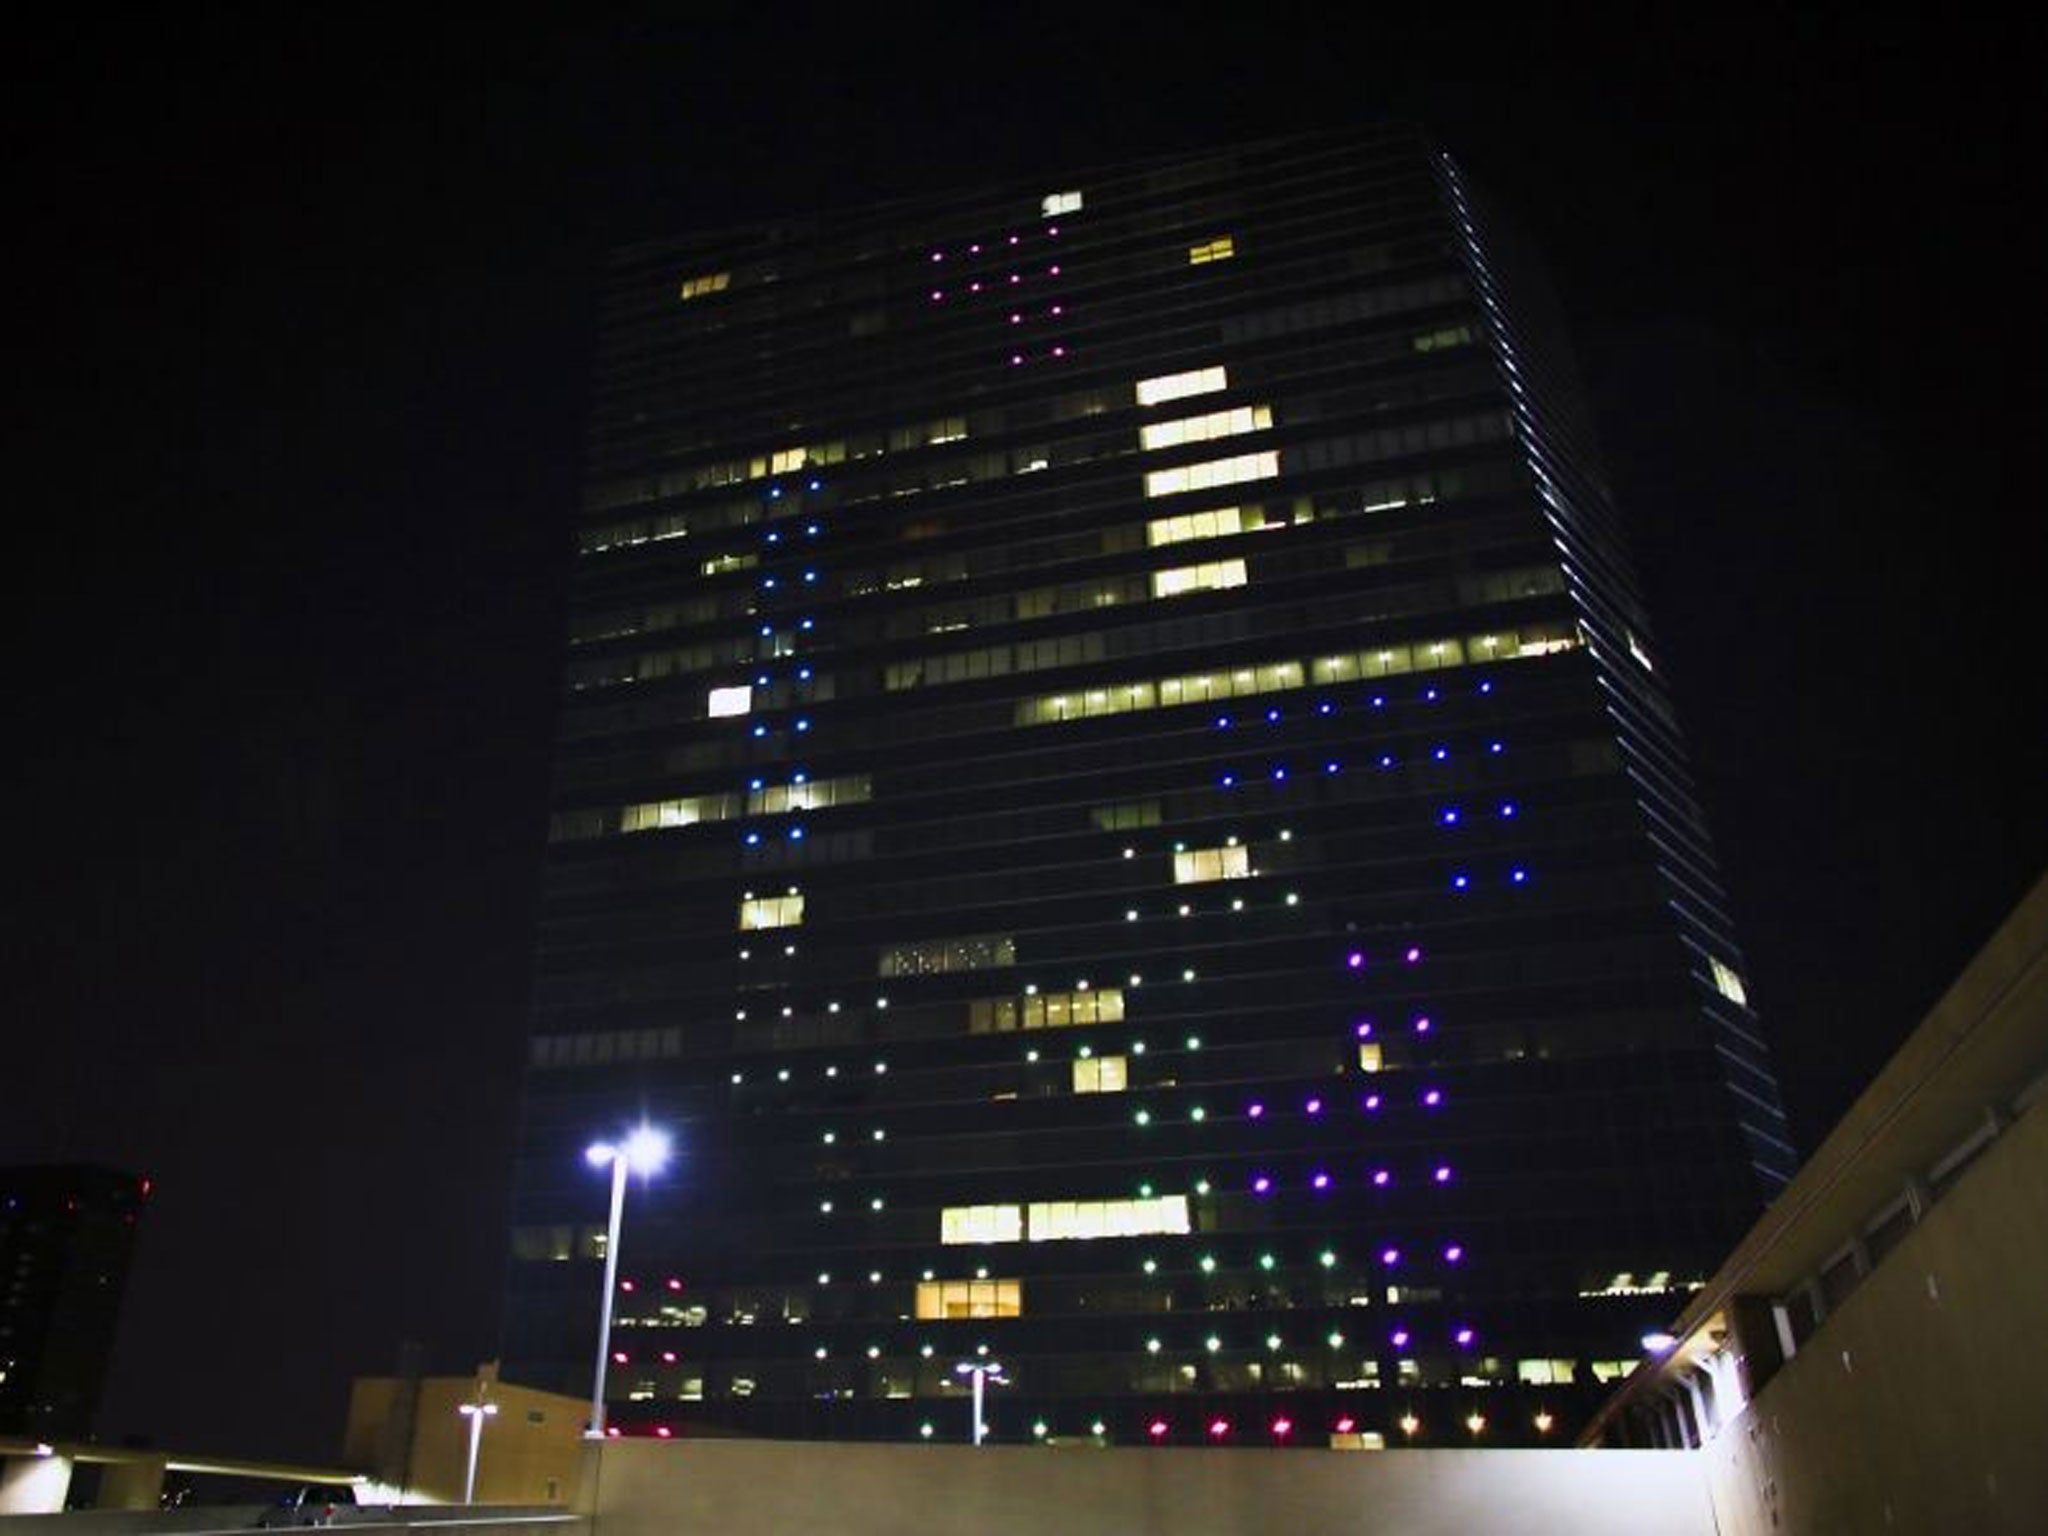 Tetris was displayed on two sides of the 29-storey Cira Centre